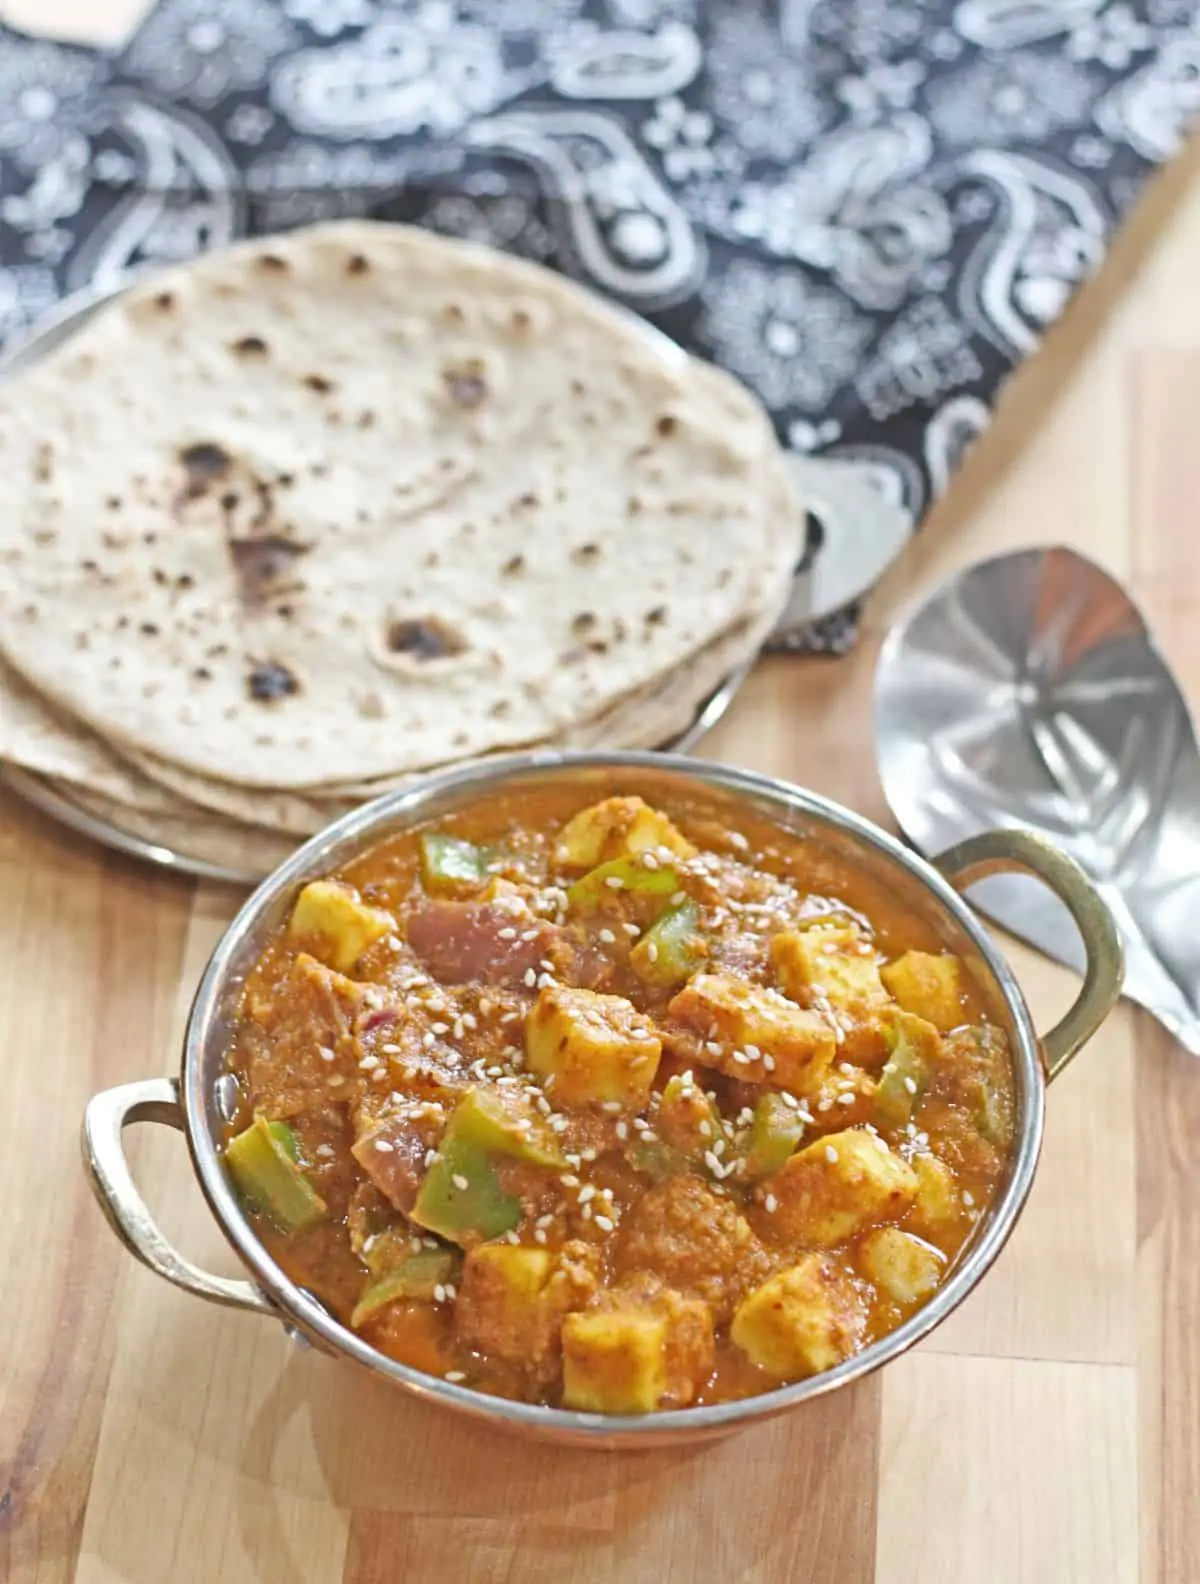 Paneer hyderabadi curry in a bowl with roti in the background